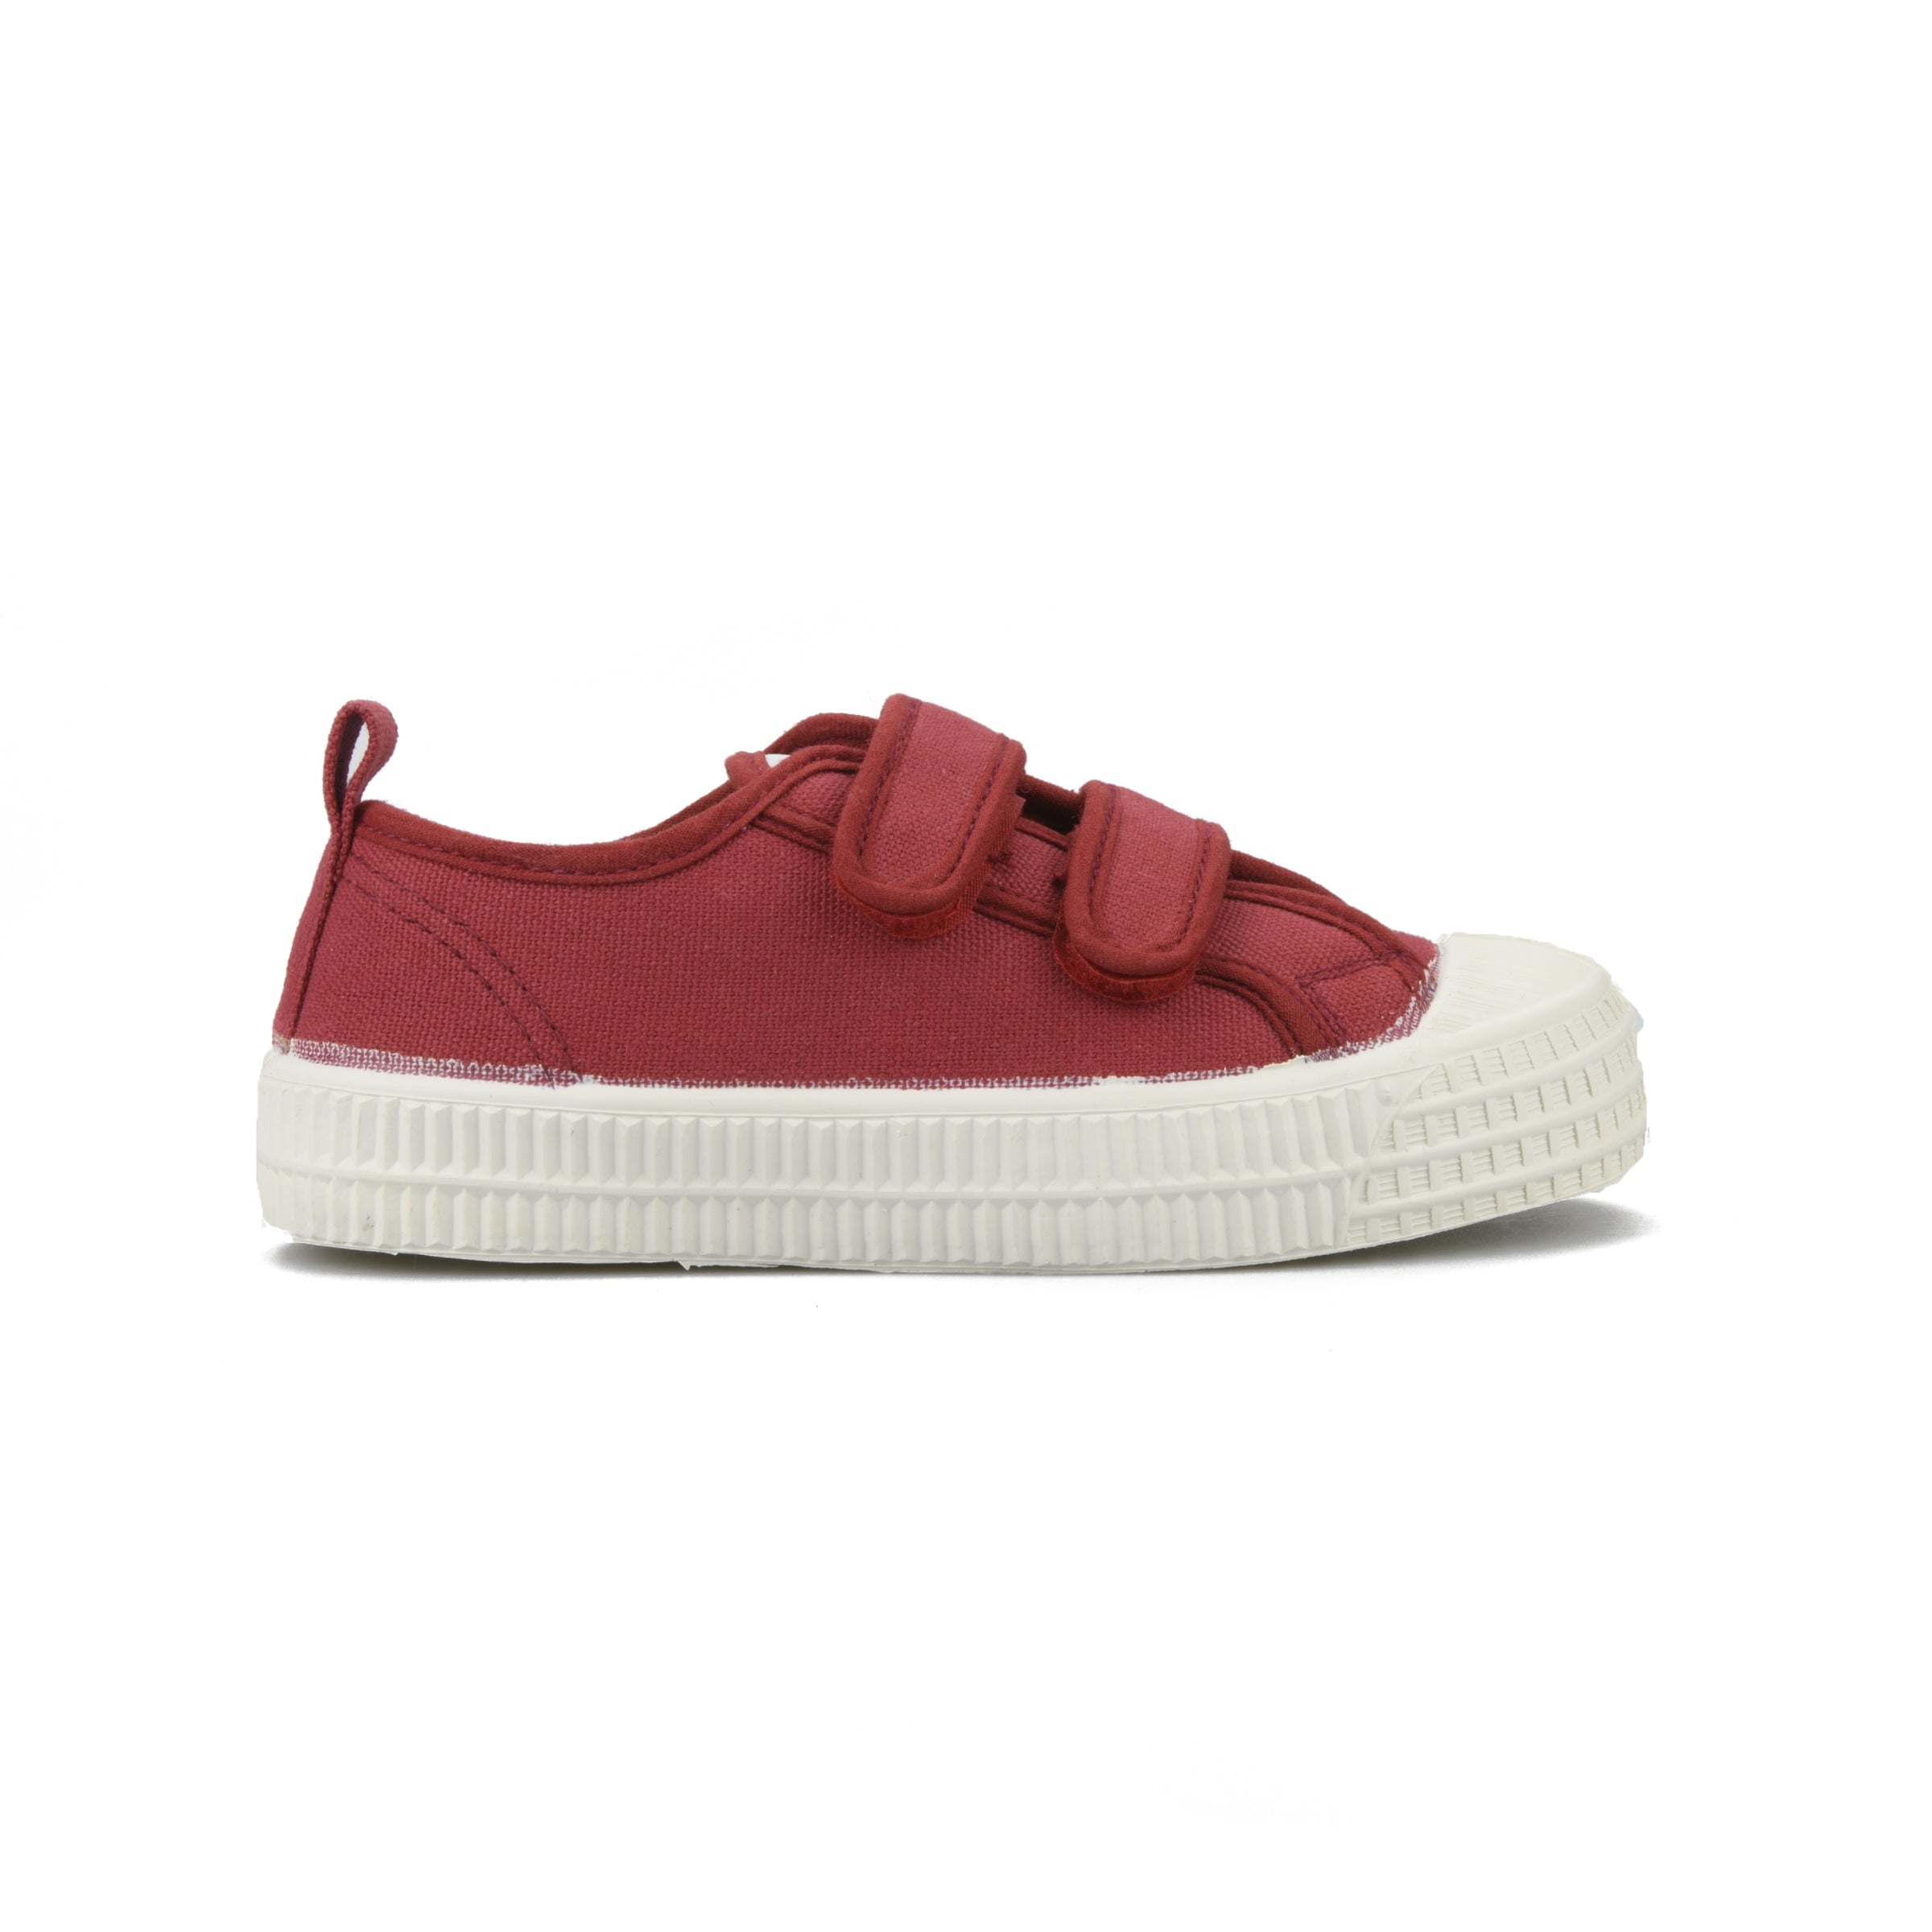 Boys & Girls Red Velcro Shoes